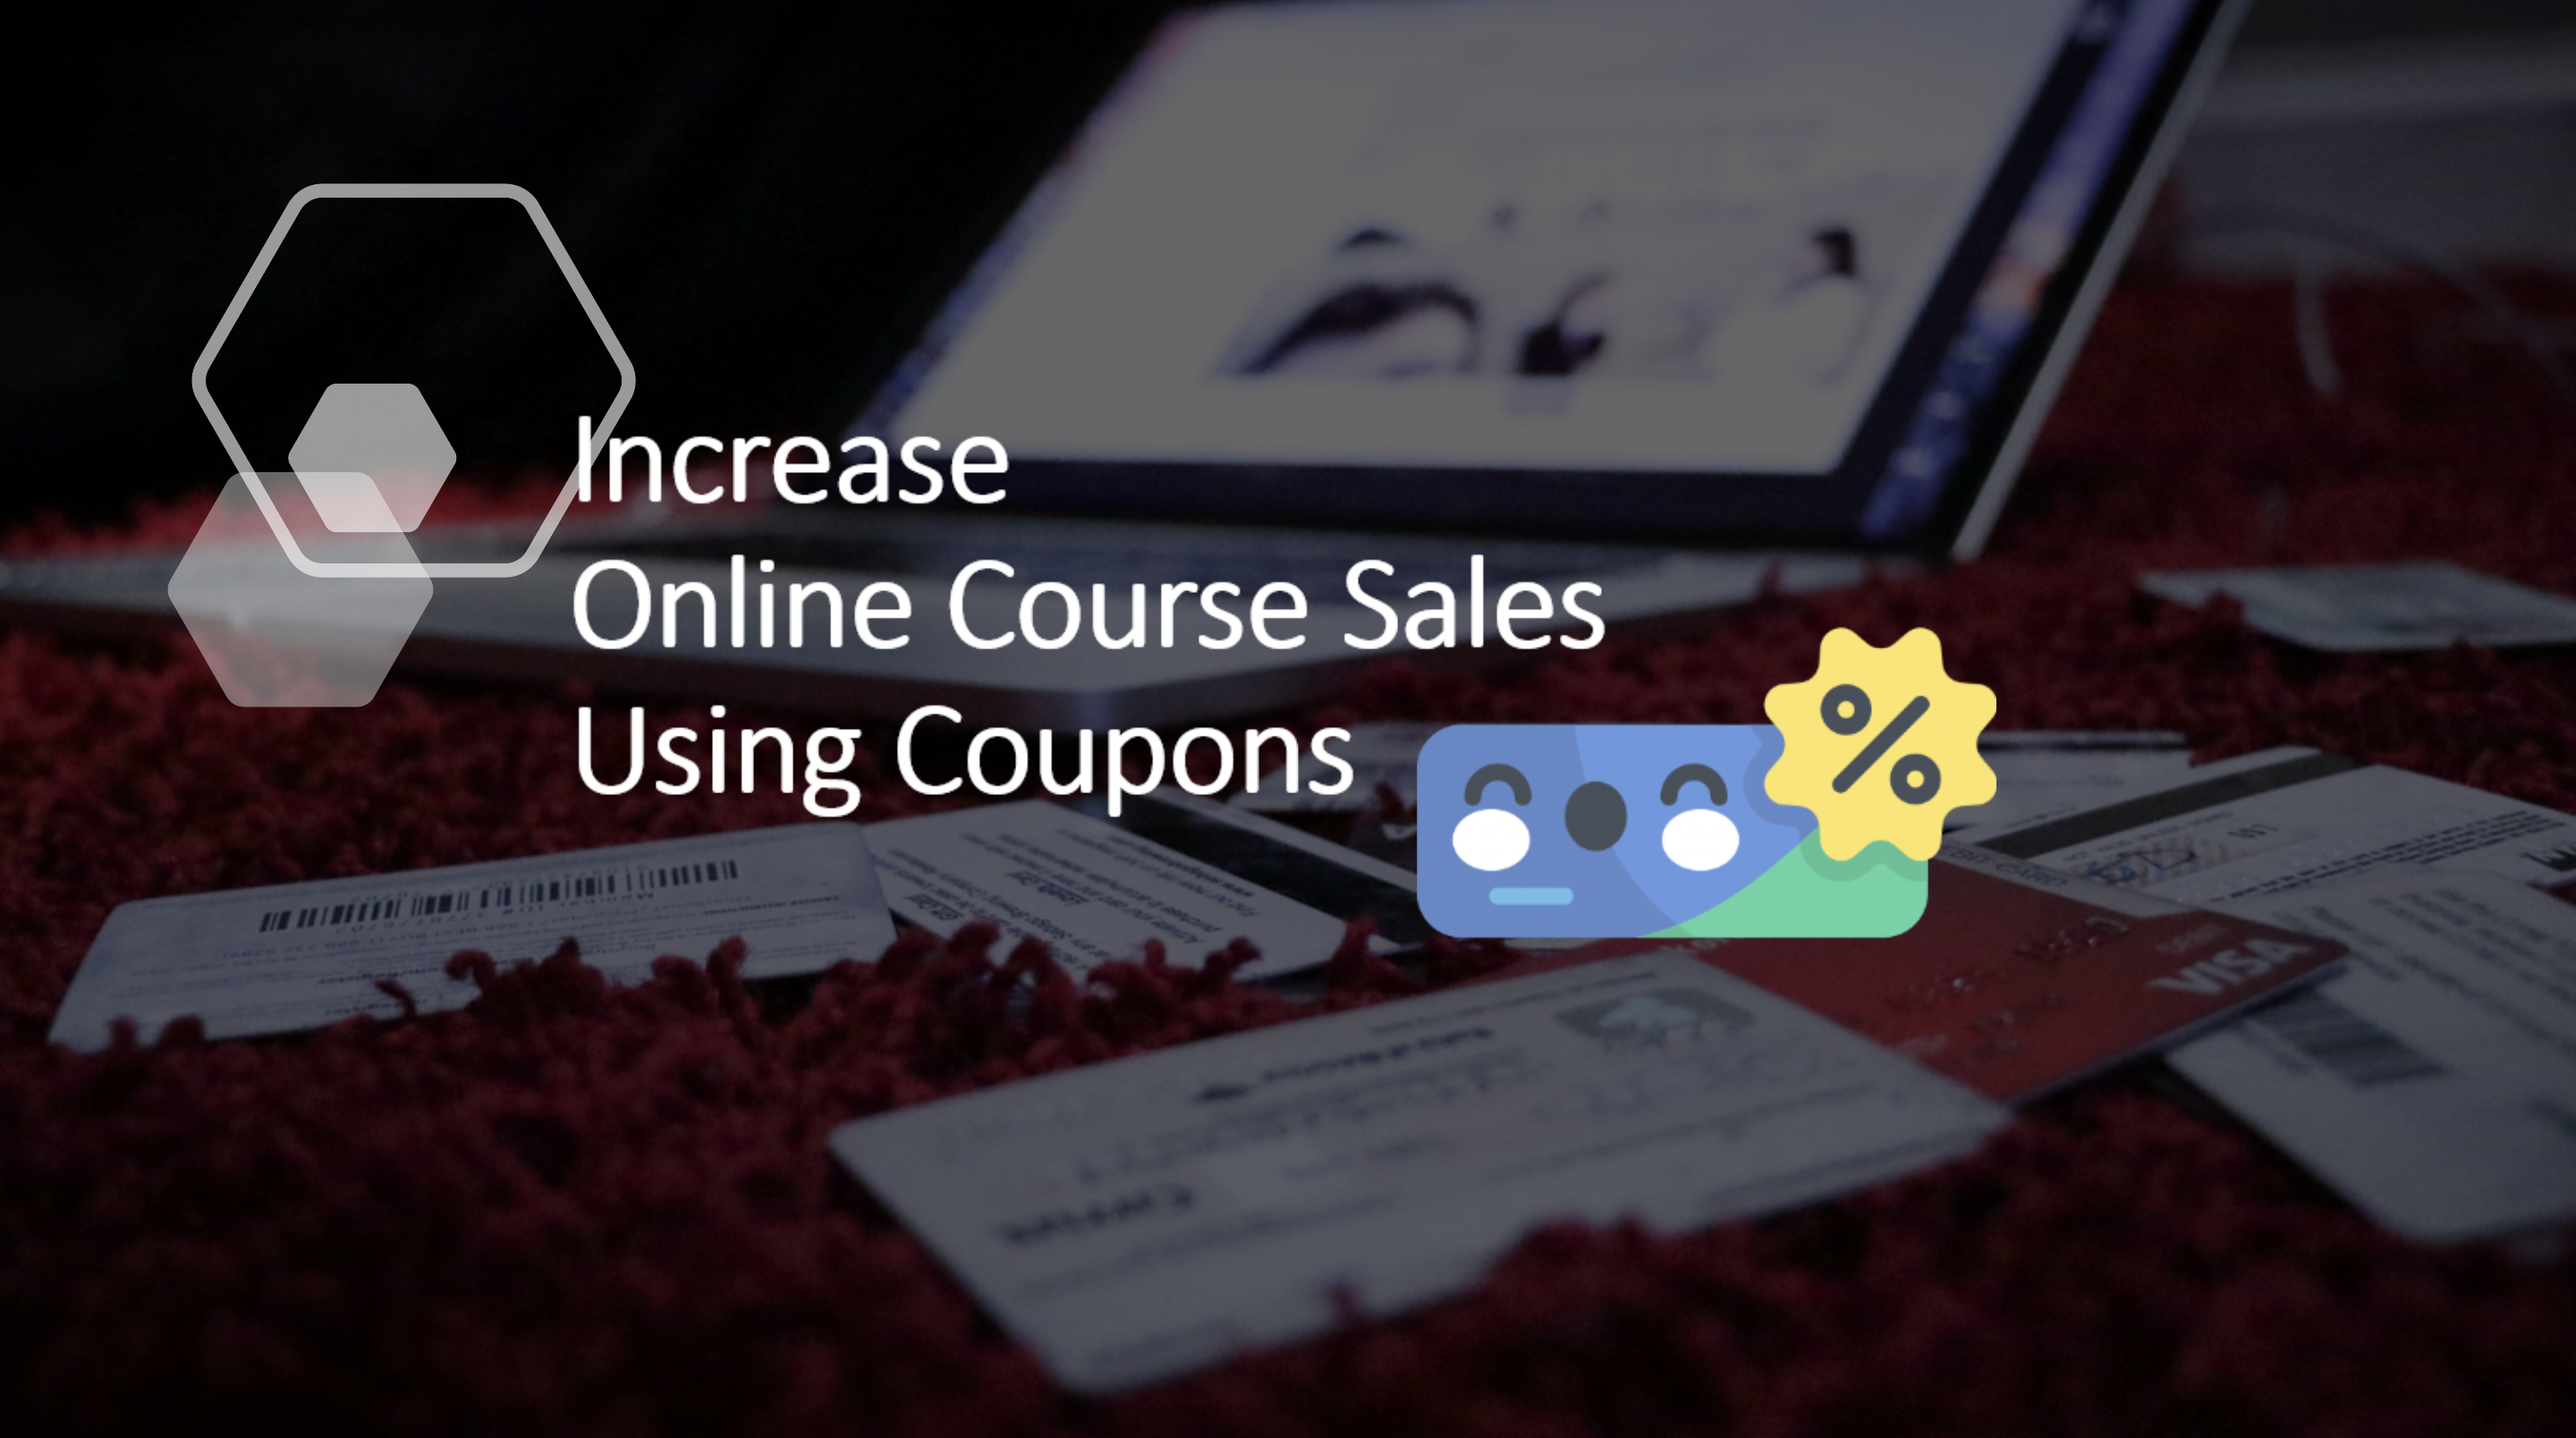 Increase Online Course Sales Using Coupons